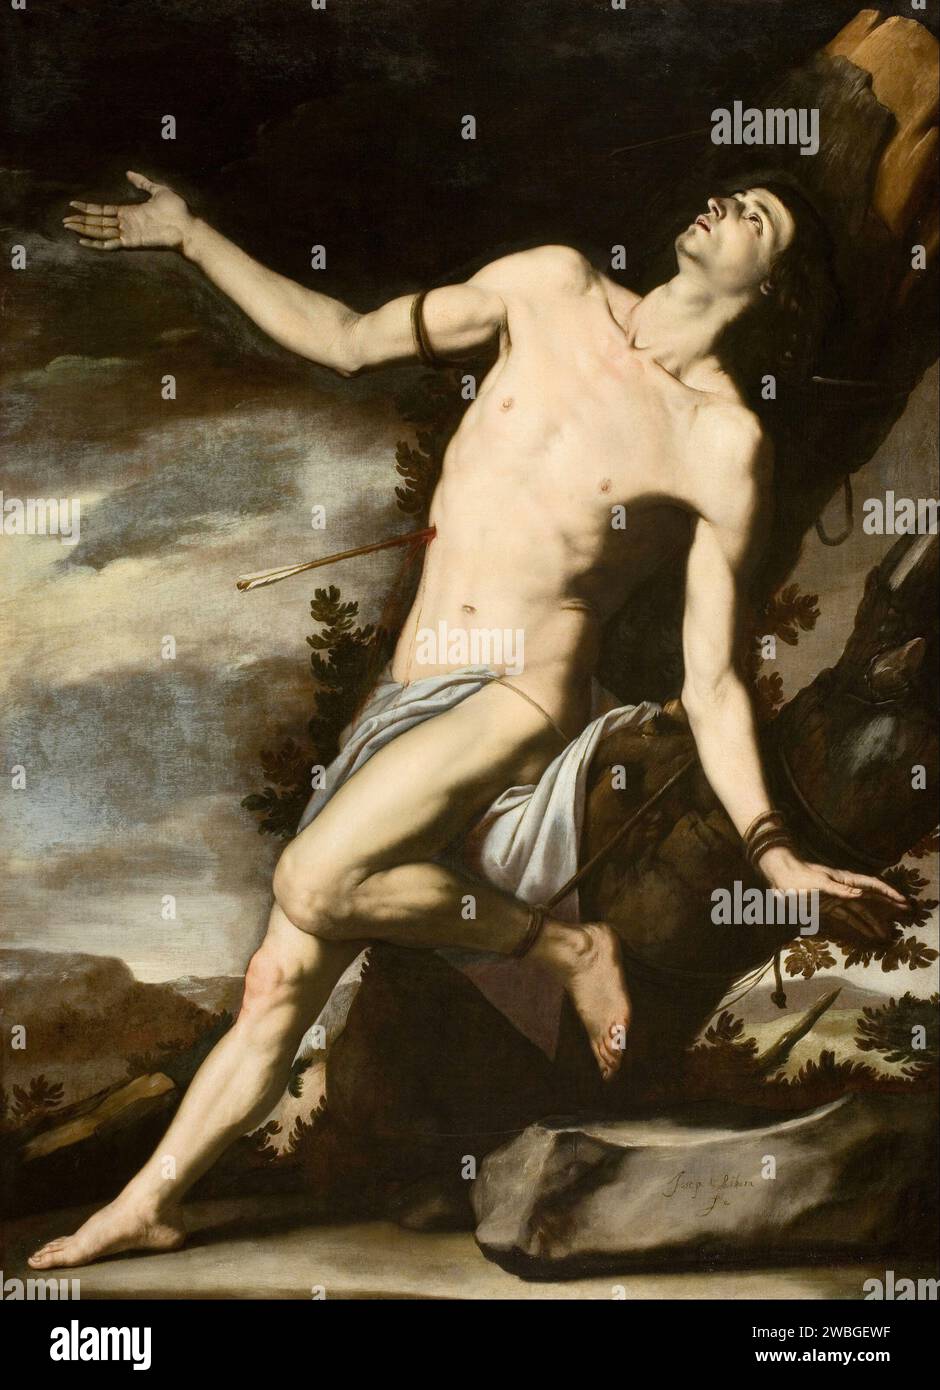 The Martyrdom of St Sebastian painted by Jusepe de Ribera. Sebastian was a member of the Roman Praetorian Guard who converted to Christianity. He was shot through with arrows but did not die from these wounds. He was tended by Irene (later Saint Irene). After his recovery he went to speak to Emperor Diocletian of his faith and was beaten to death. Stock Photo